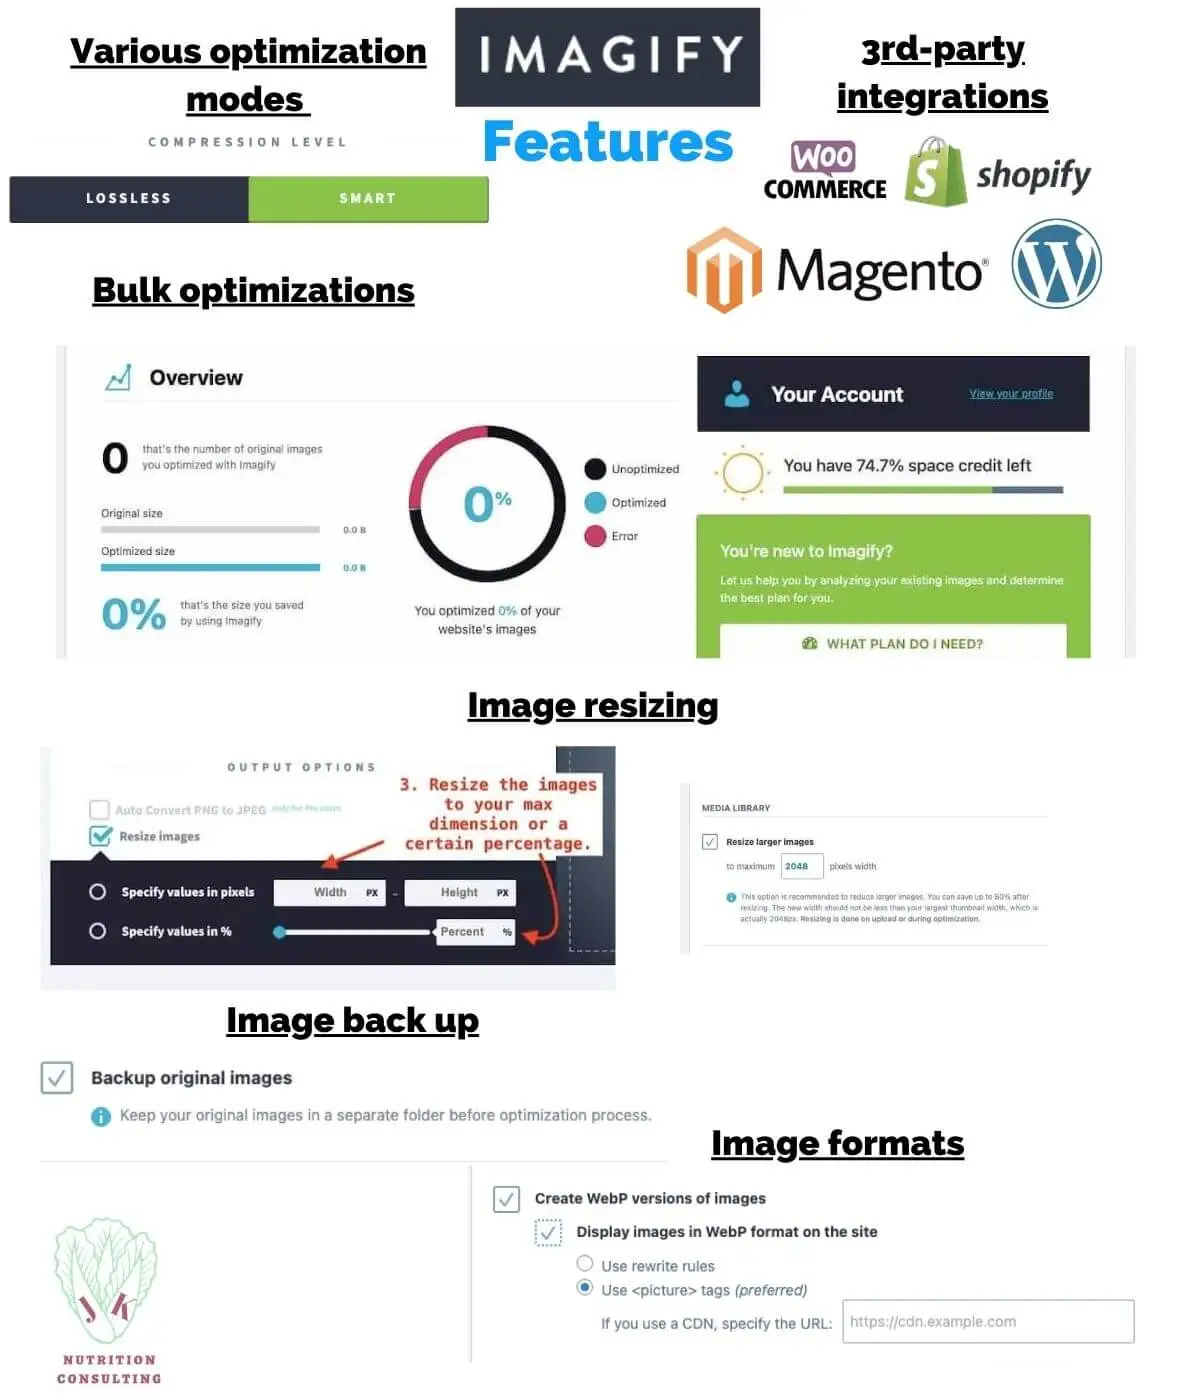 Infographic of the additional features of Imagify: shows the various optimization modes, 3rd party integrations, bulk optimization, image resizing, image back up, and image formats | Imagify WebP | JK Nutrition Consulting